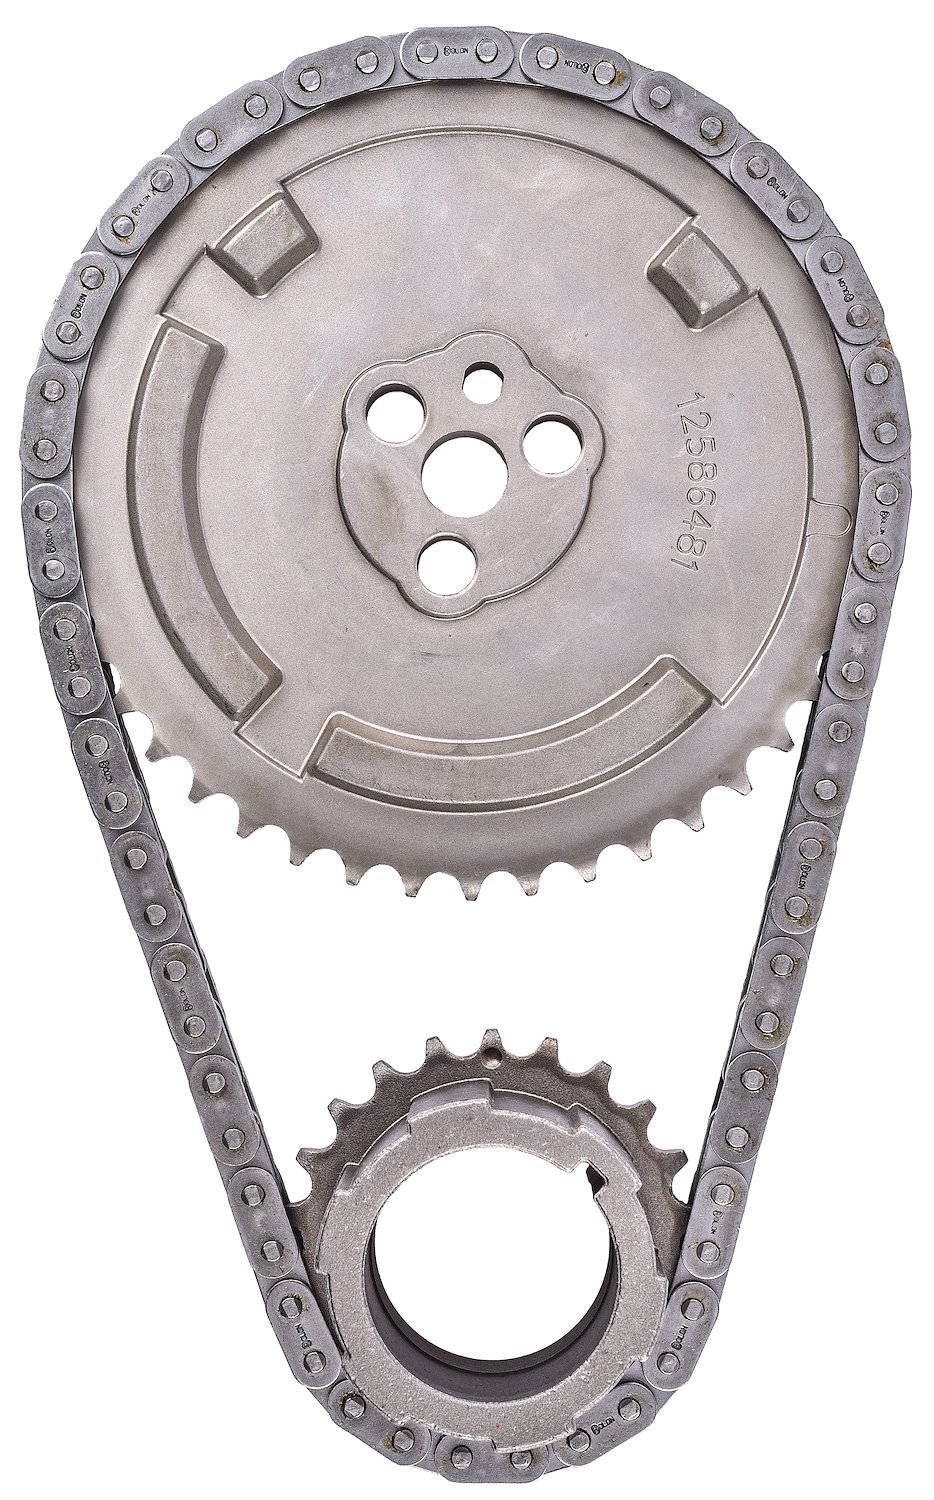 Timing Chain Set for 2006-2013 GM LS Gen